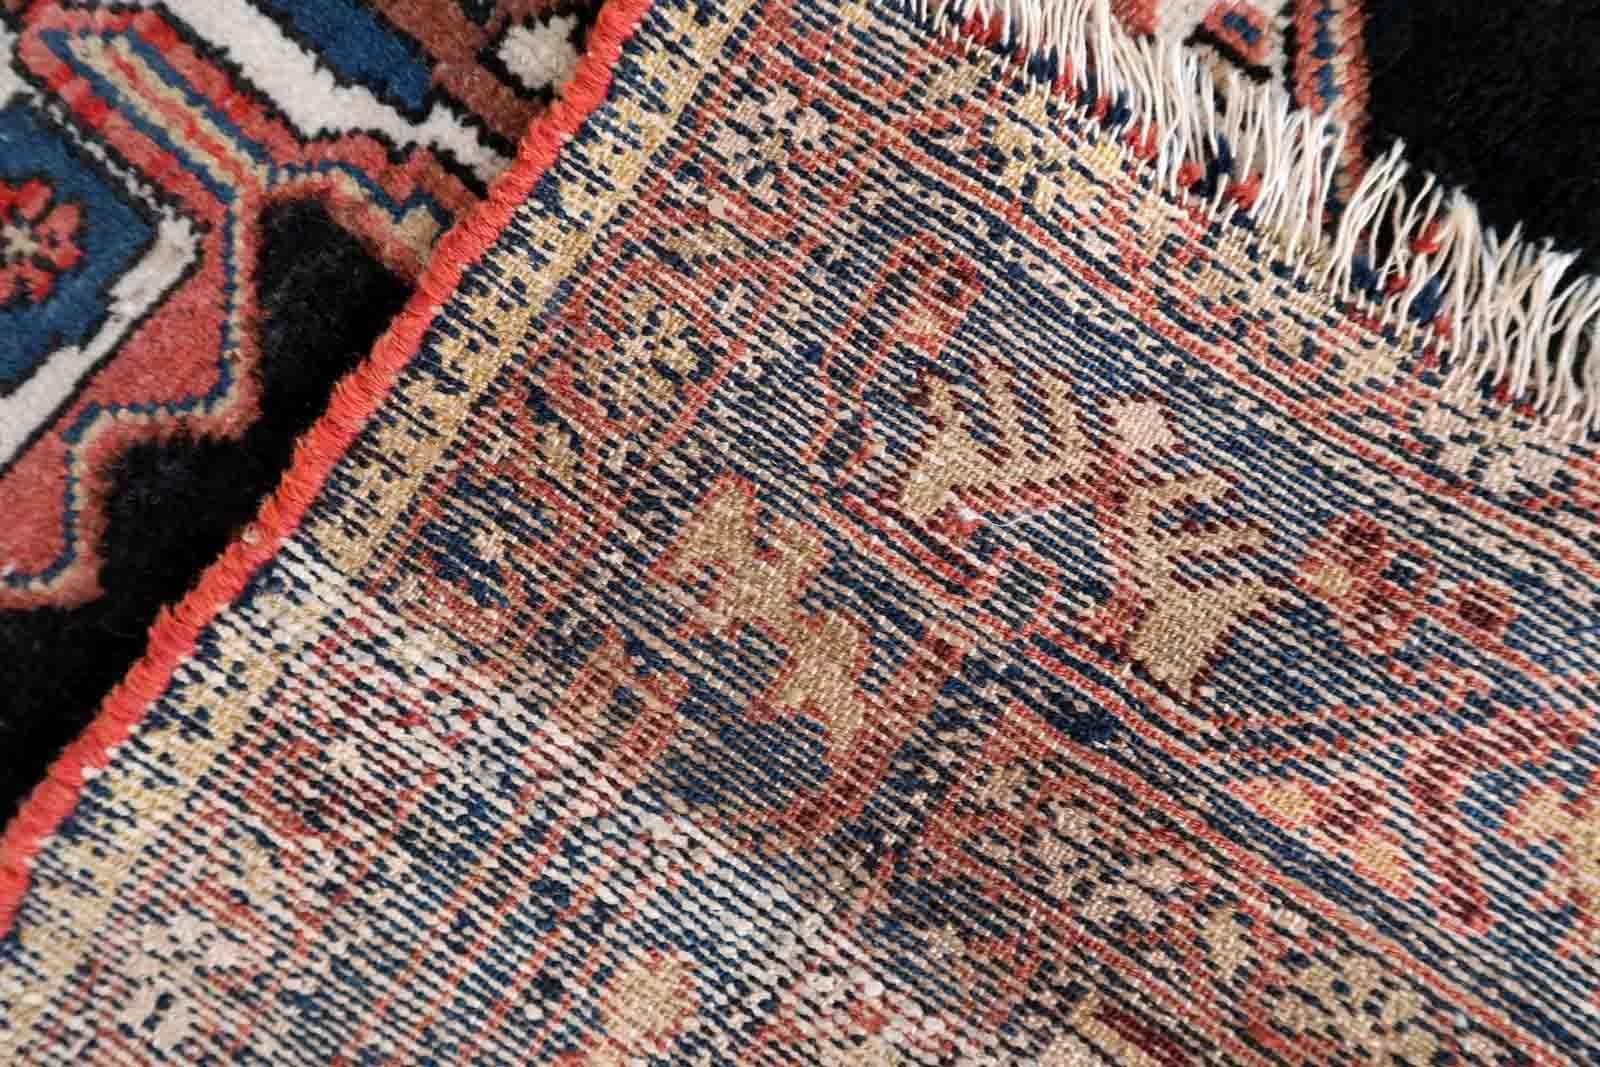 Handmade antique Malayer rug in black and white colors. The rug is from the beginning of 20th century in original condition, it has some low pile.

-condition: original, some pile,

-circa: 1920s,

-size: 4' x 6.5' (123cm x